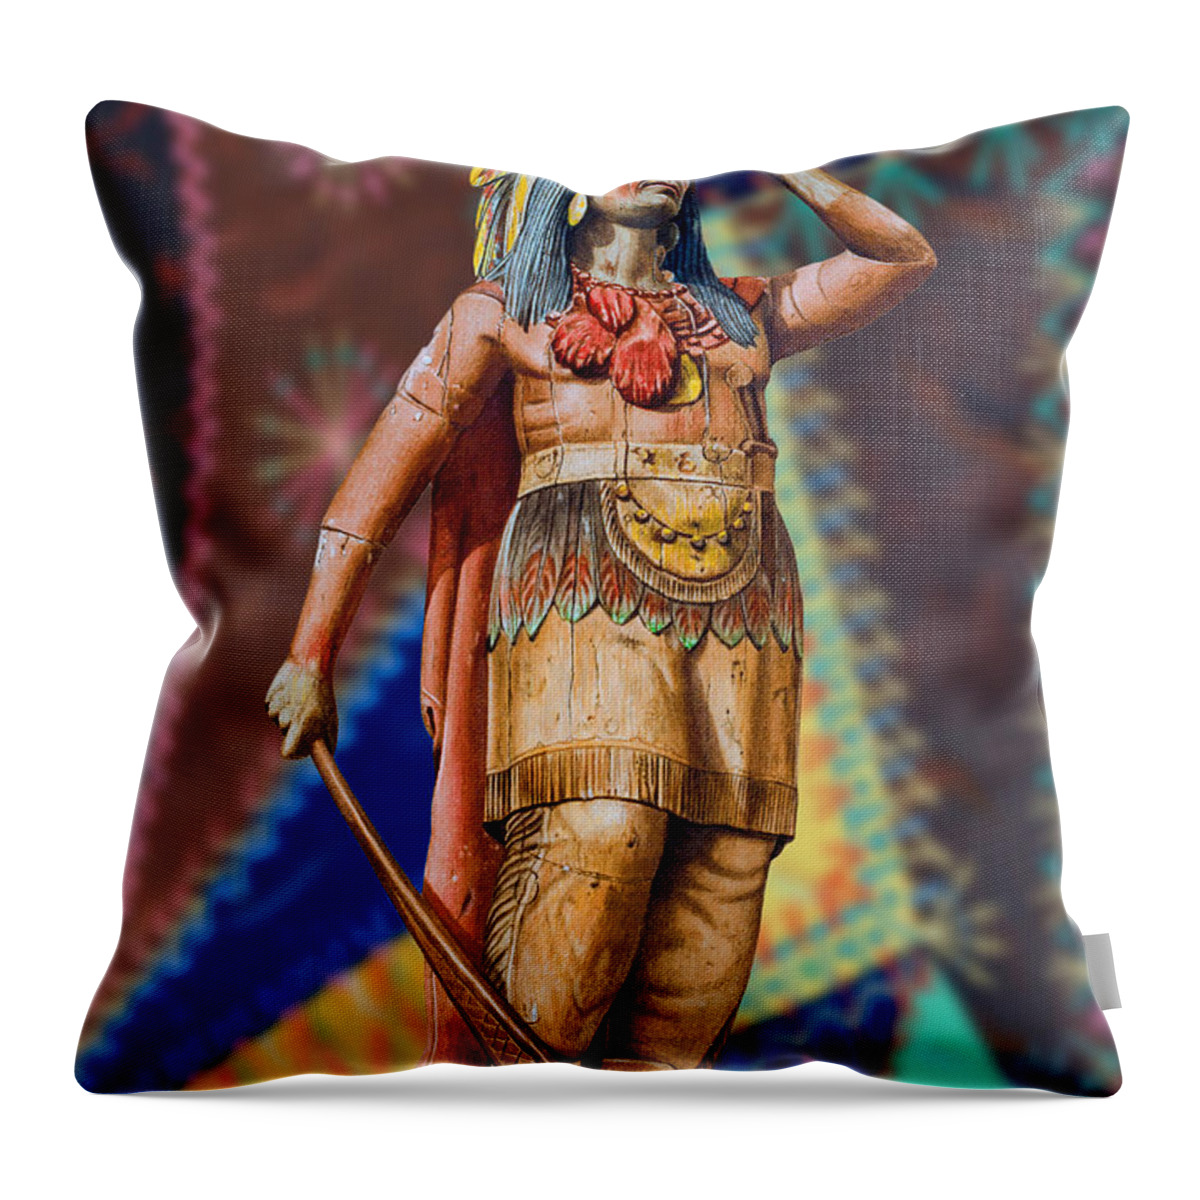 America Throw Pillow featuring the painting Wooden American Indian by Vincent Monozlay